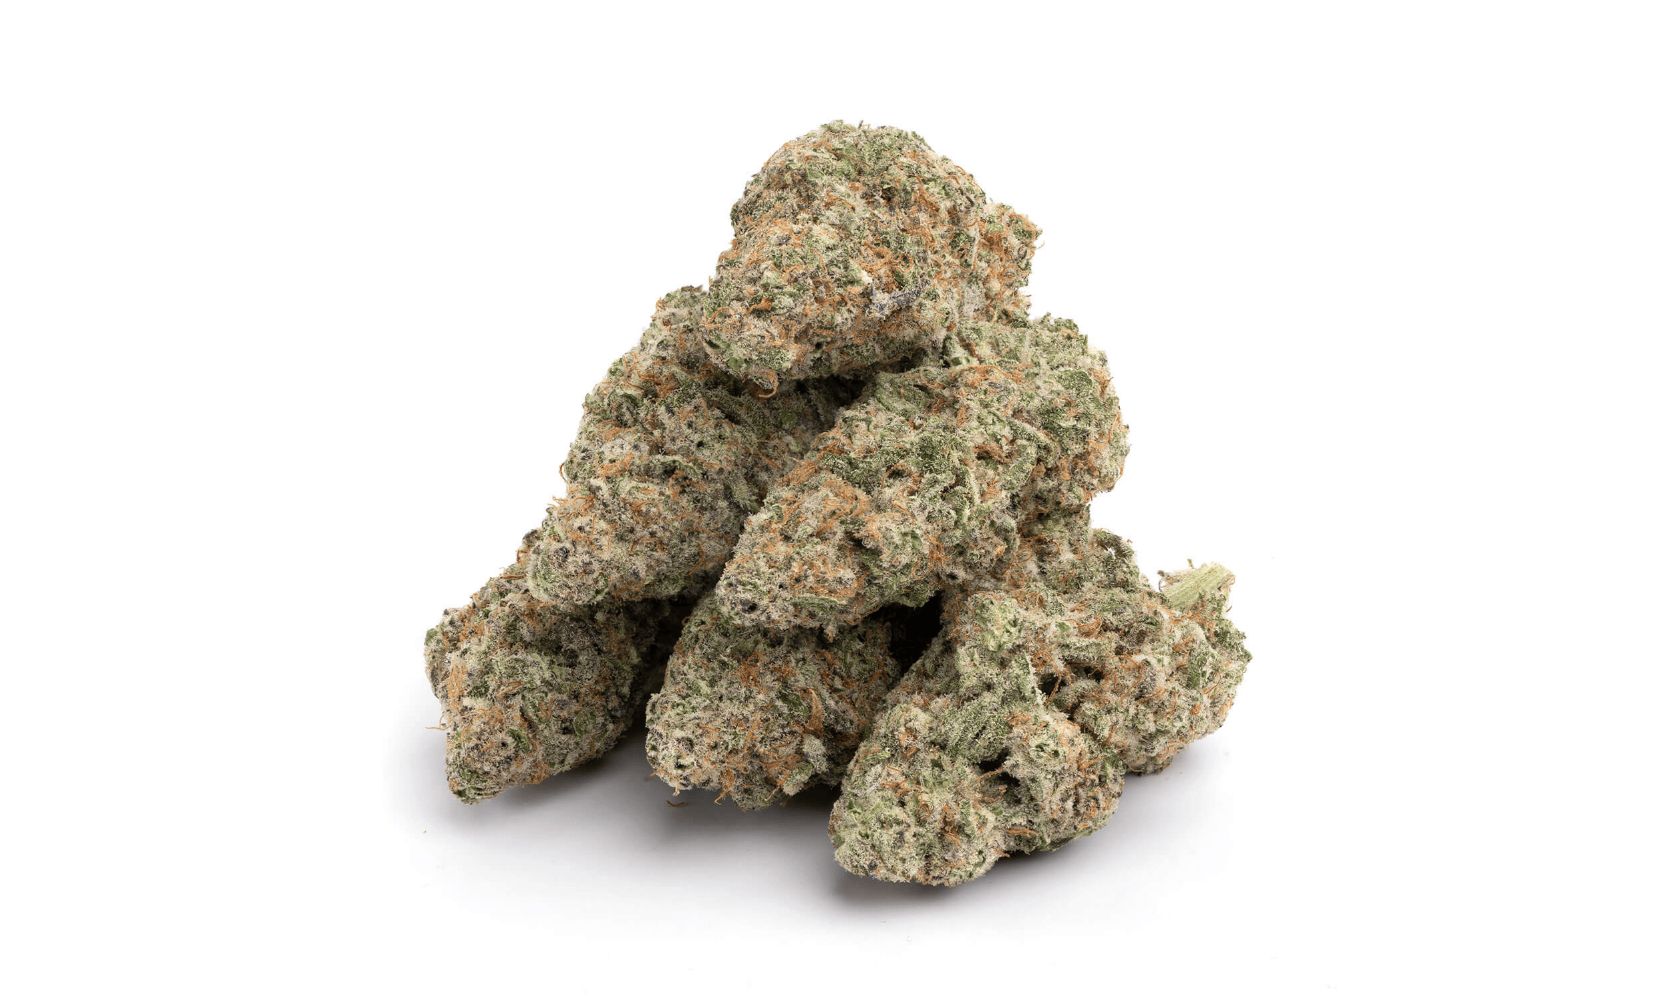 The Animal Cookies strain is one Indica strain with a cult-like following and for good reasons.